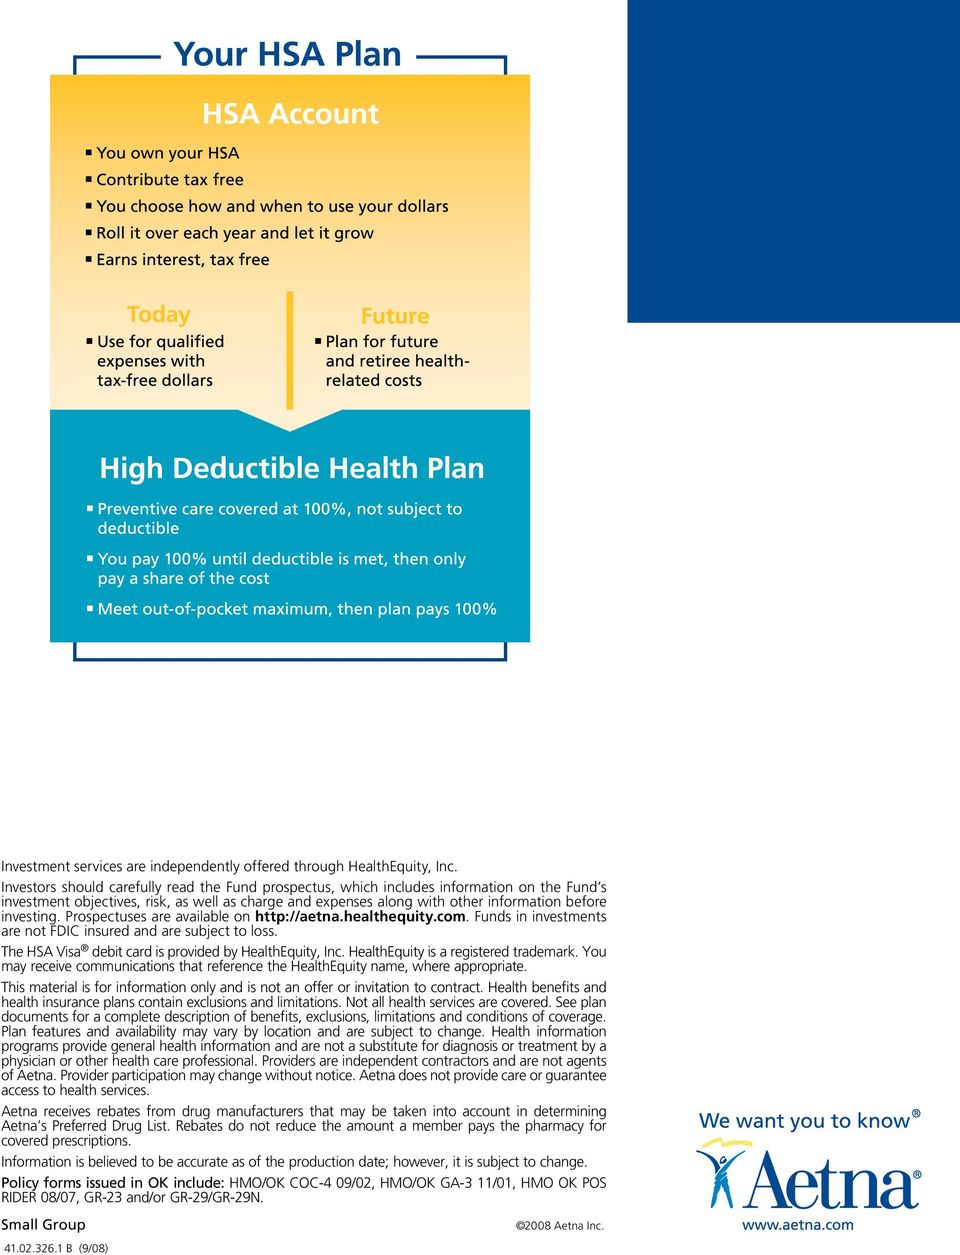 Prospectuses are available on http://aetna.healthequity.com. Funds in investments are not FDIC insured and are subject to loss. The HSA Visa debit card is provided by HealthEquity, Inc.